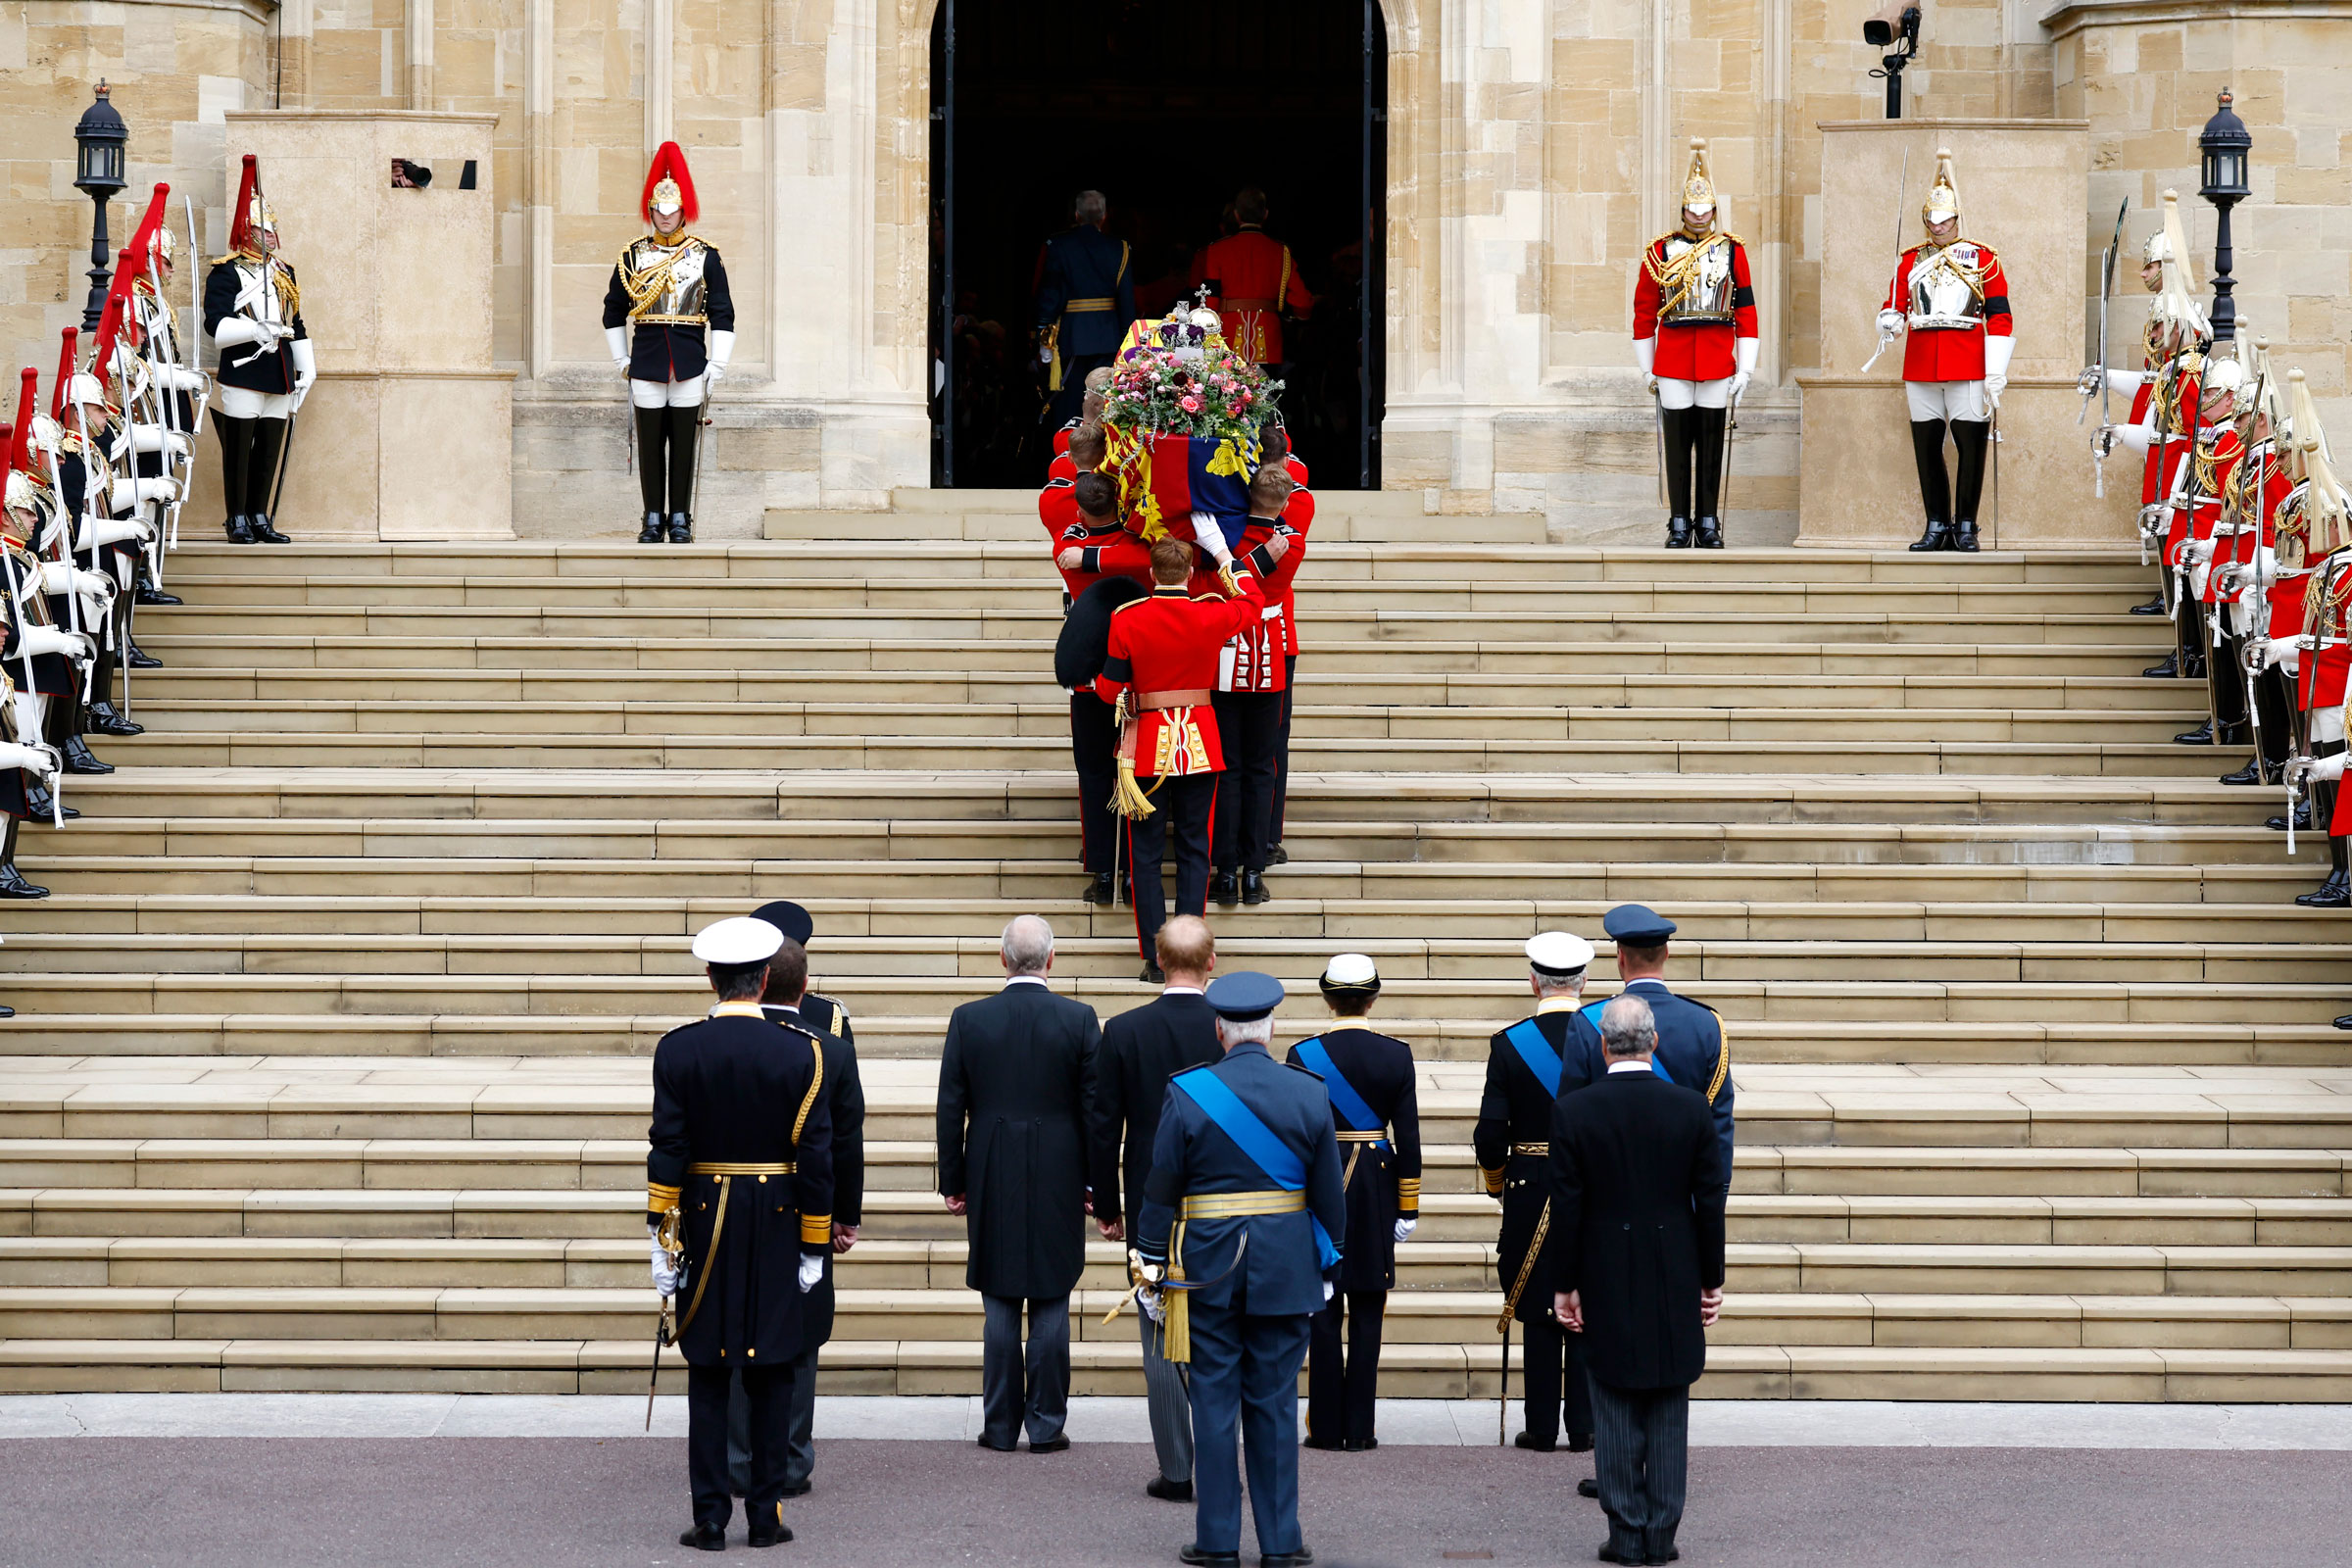 Pall bearers carry the coffin of Queen Elizabeth II with the Imperial State Crown resting on top into St. George's Chapel at Windsor Castle. (Jeff J Mitchell—Getty Images)